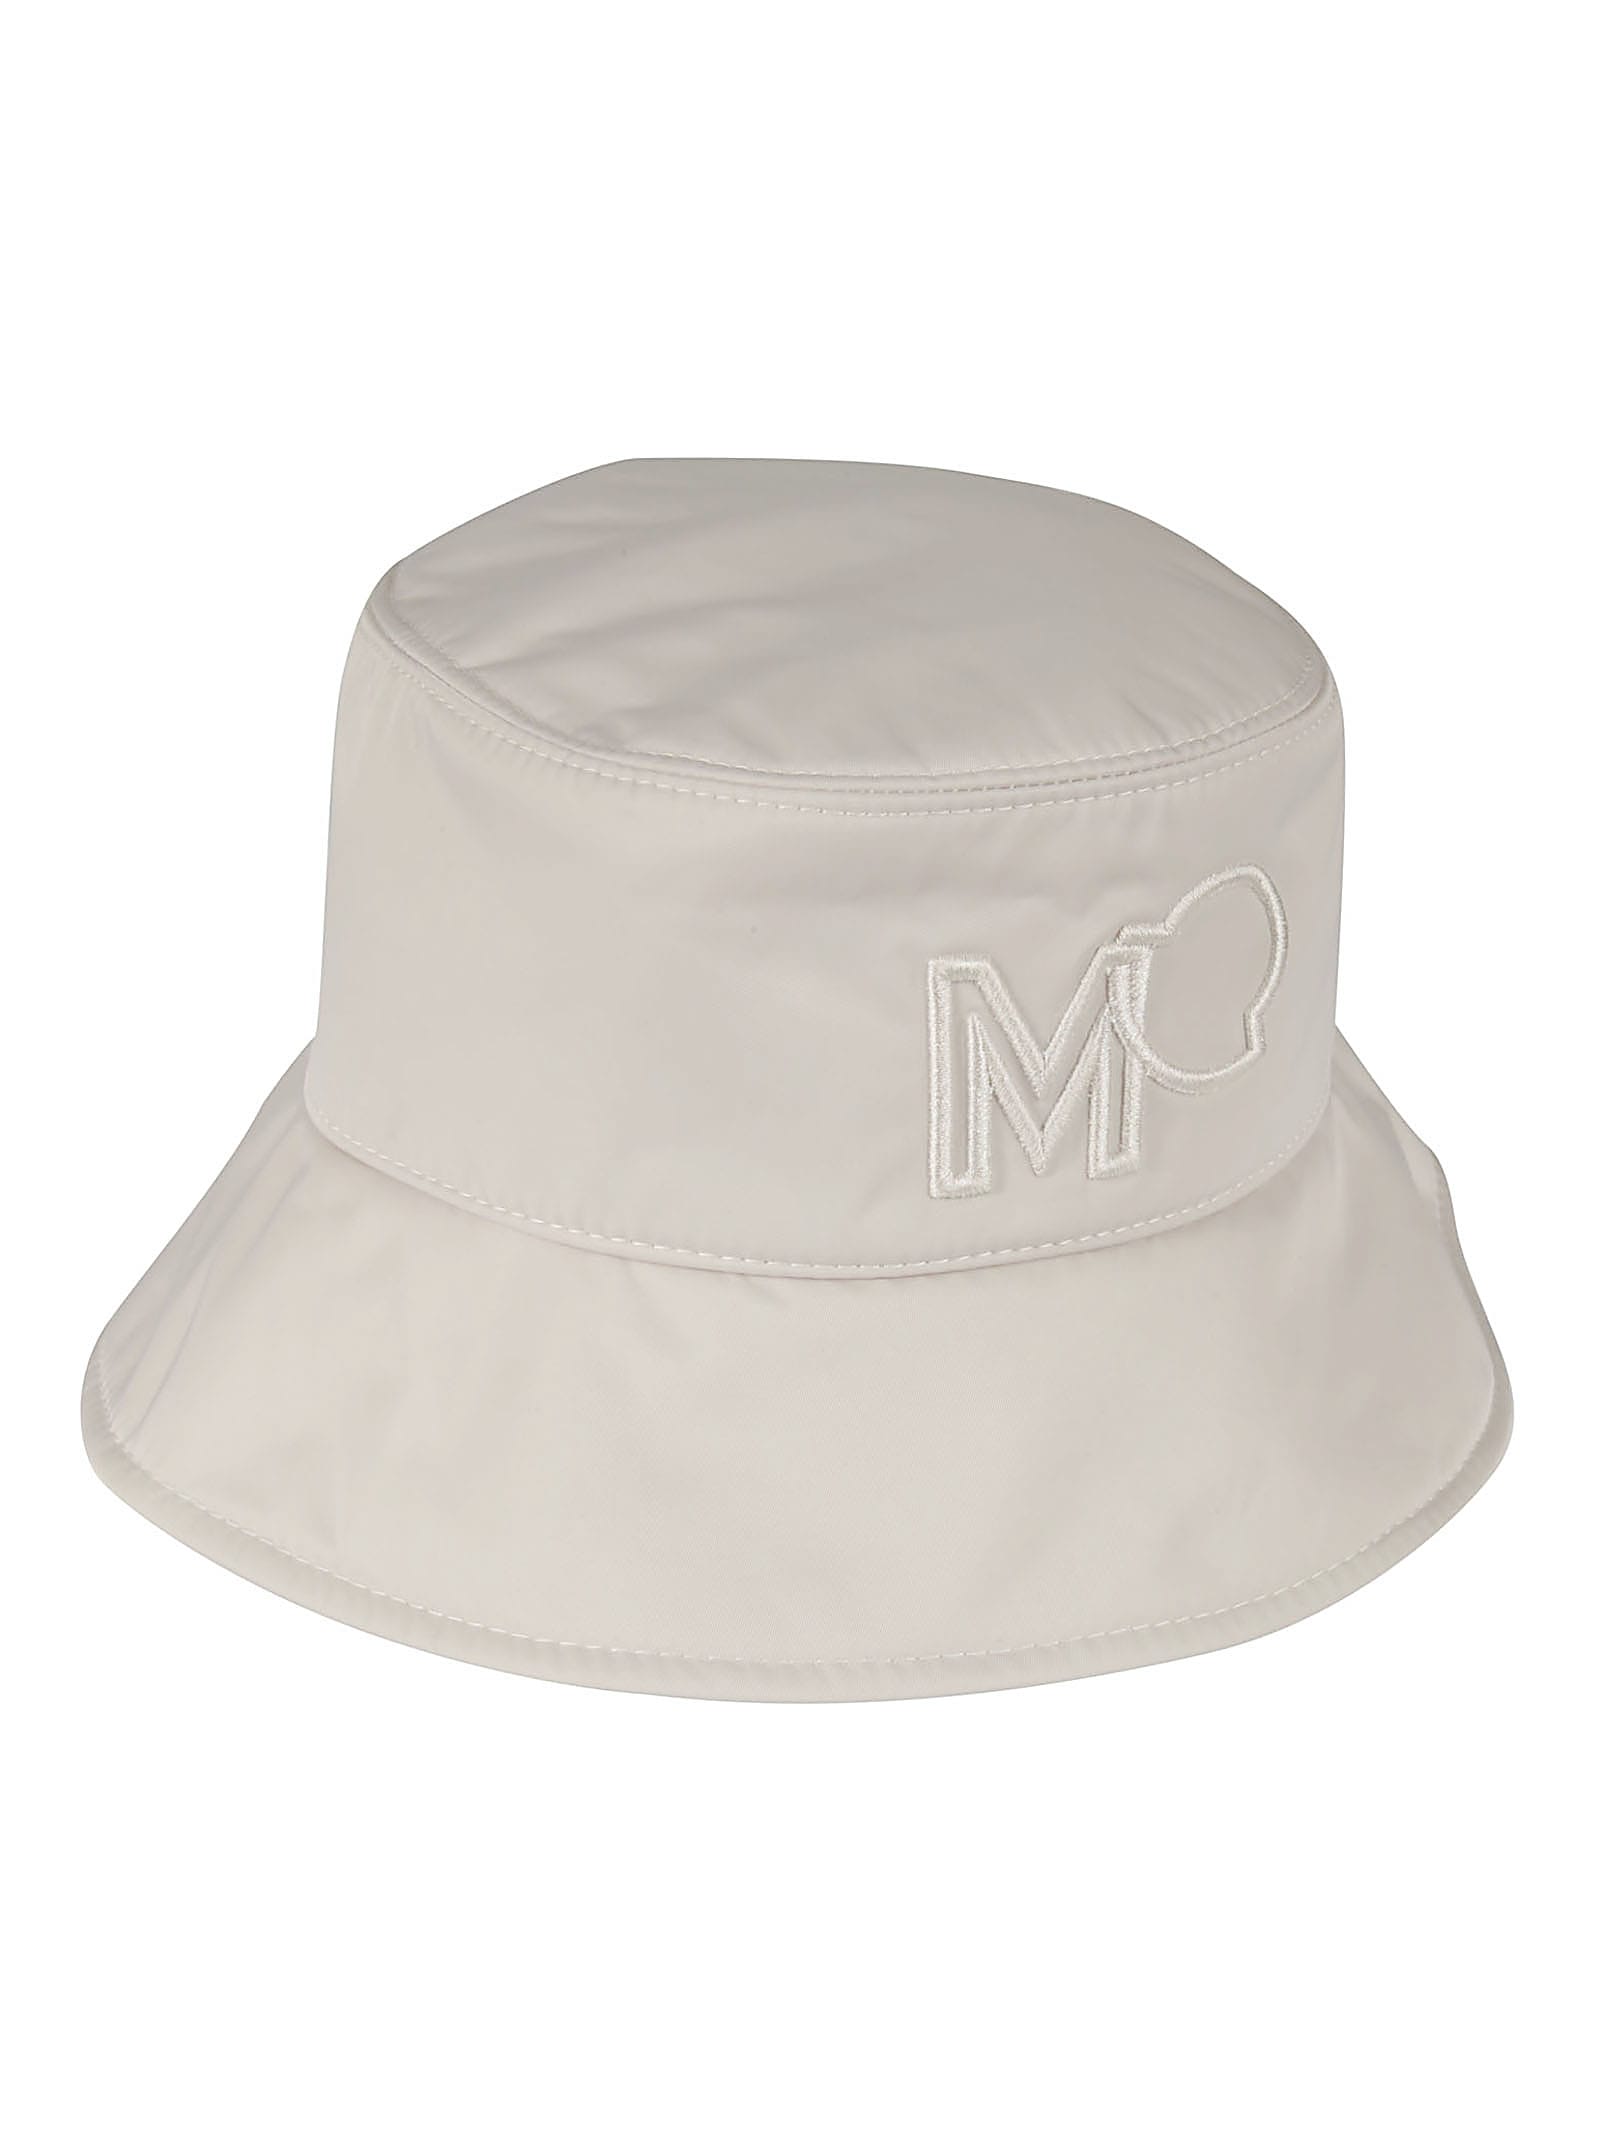 MONCLER EMBROIDERED LOGO BUCKET HAT,3B73310 54A1K201